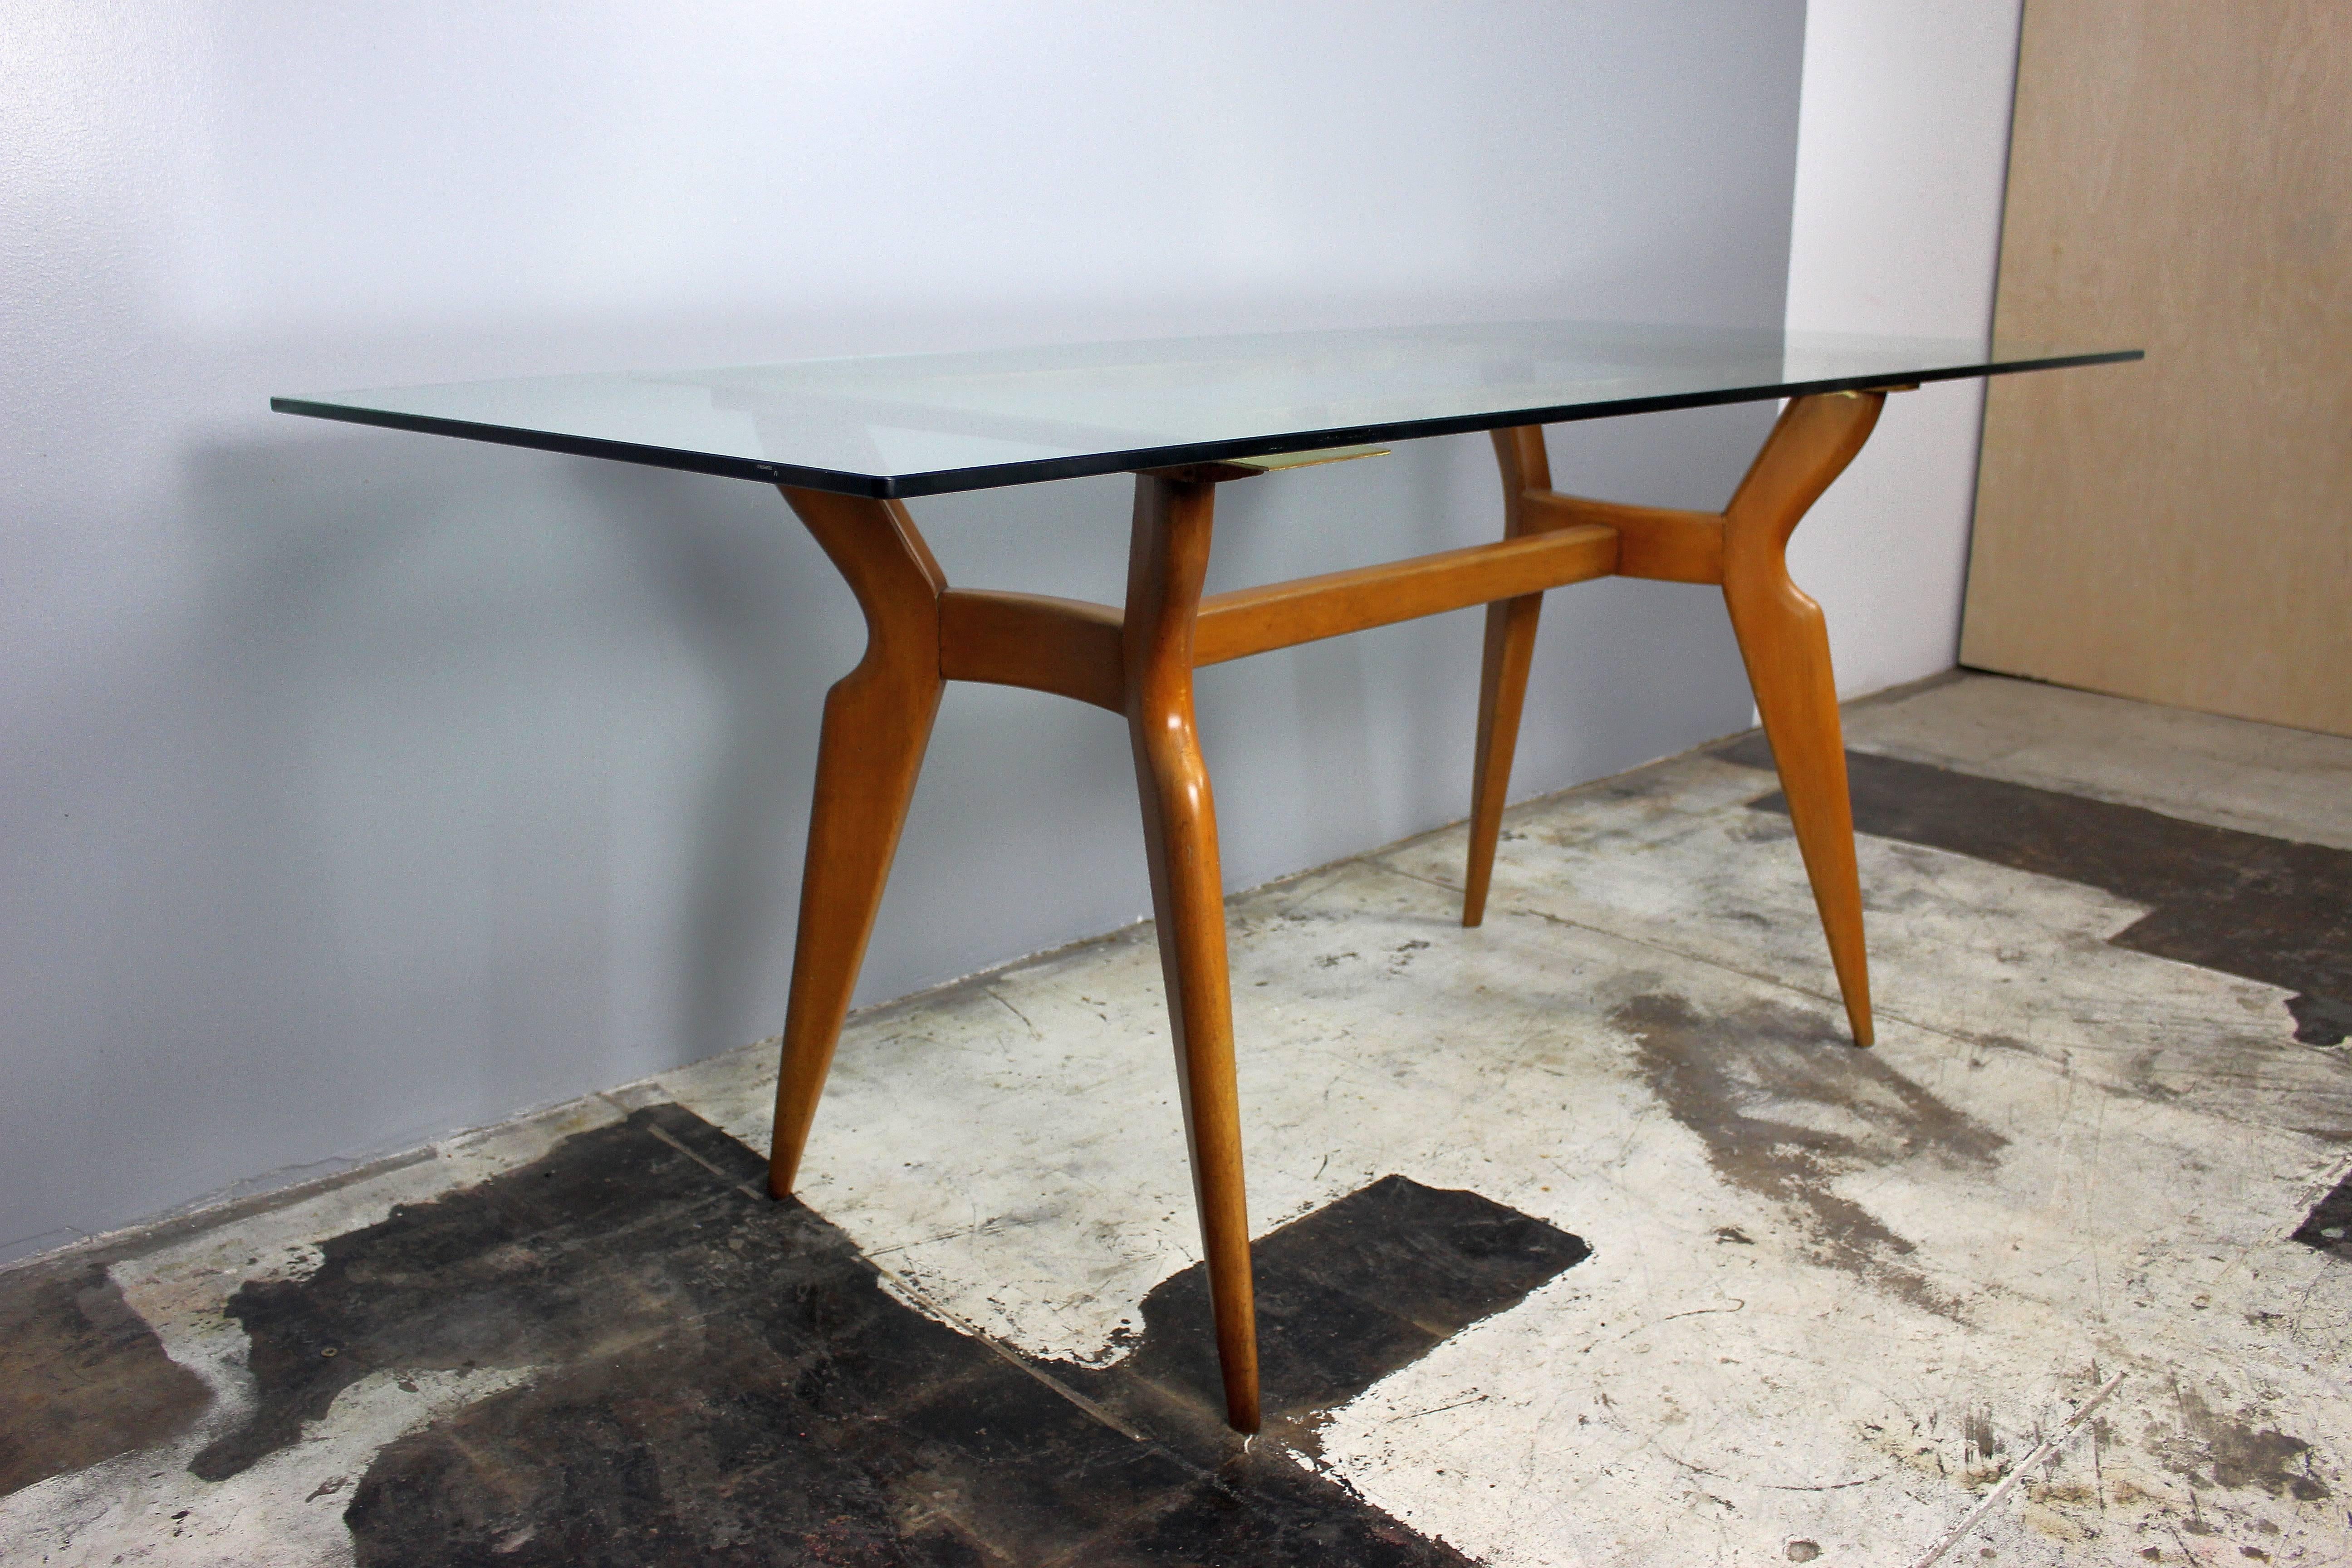 Table is in style of Gio Ponti all together nice look and essential Italian design
wood base and top is 1/2 inch glass or approximately 1.25 cm thick table is in good vintage condition no scratches on the glass.

Pls note: Item is located at